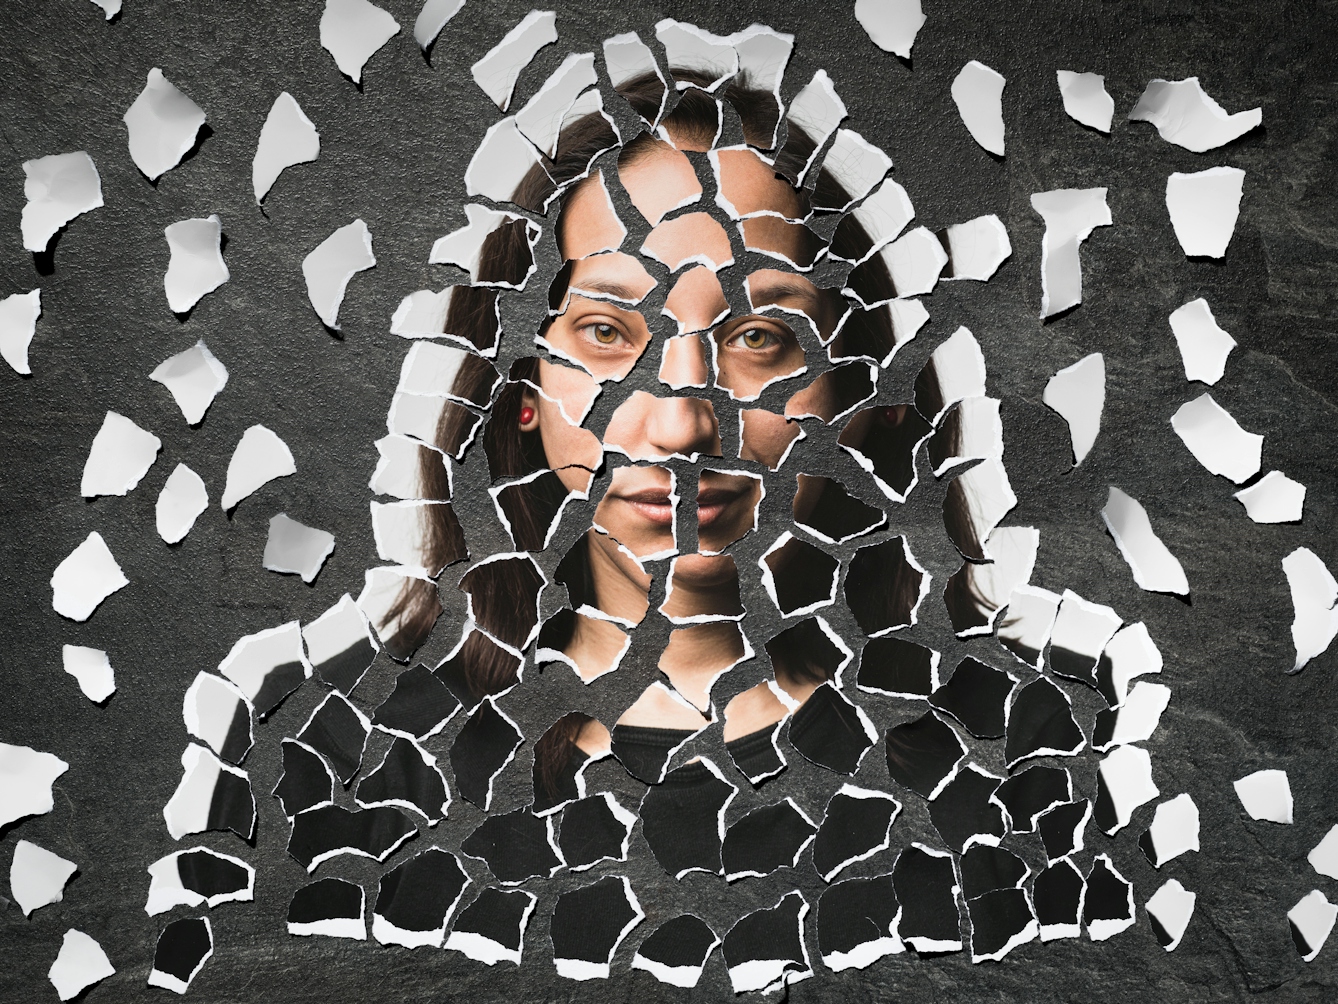 Photograph of a collages of torn up pieces of a photographic print scattered on a grey slate background. There are fragments of eyes, lips, hair and dark and light tones. The arrangement of the fragments are starting to form a recognisable face.